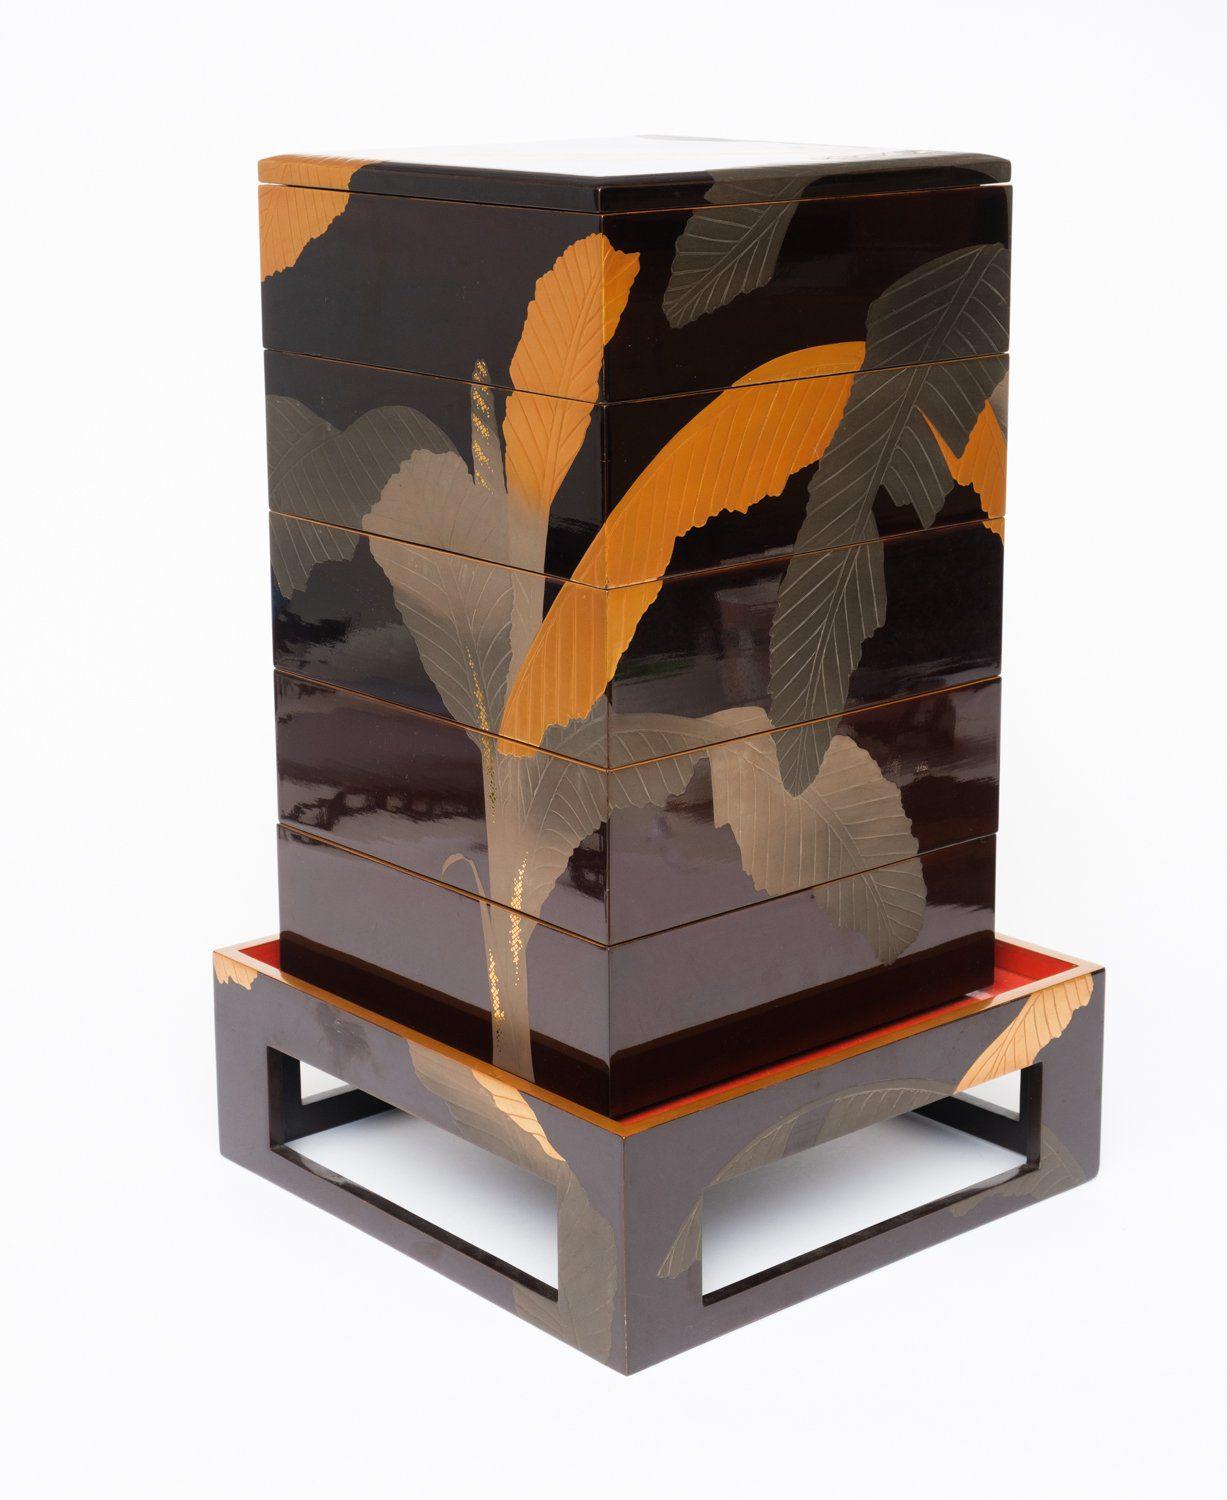 Japanese lacquered 5-tiered jûbako 重箱 (picnic box) with banana leaf design For Sale 1